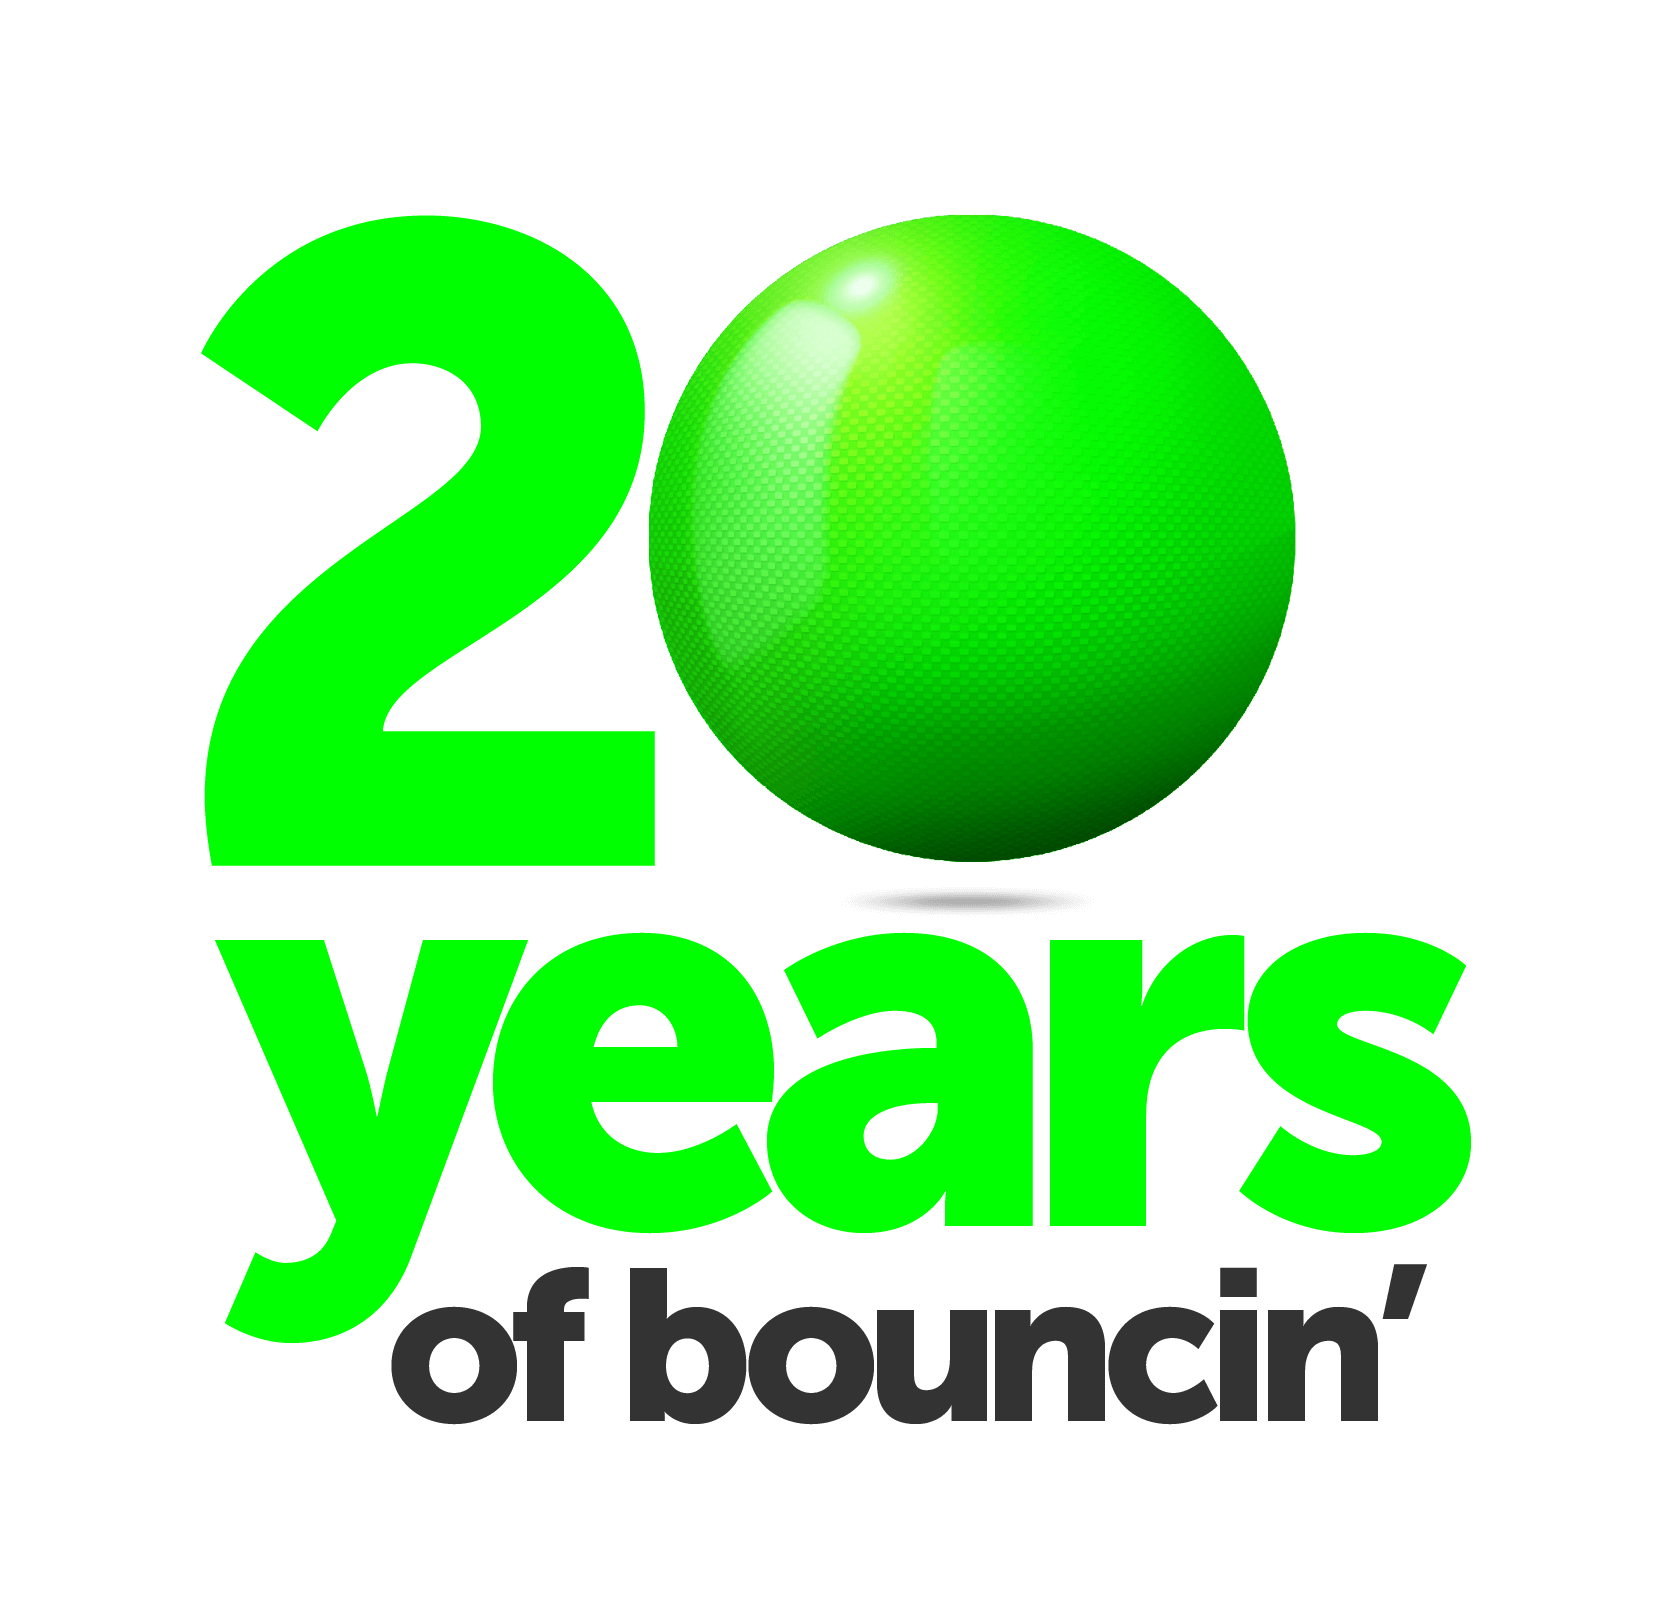 Bounce Graphic Design Newcastle, 20 Years of Bouncing